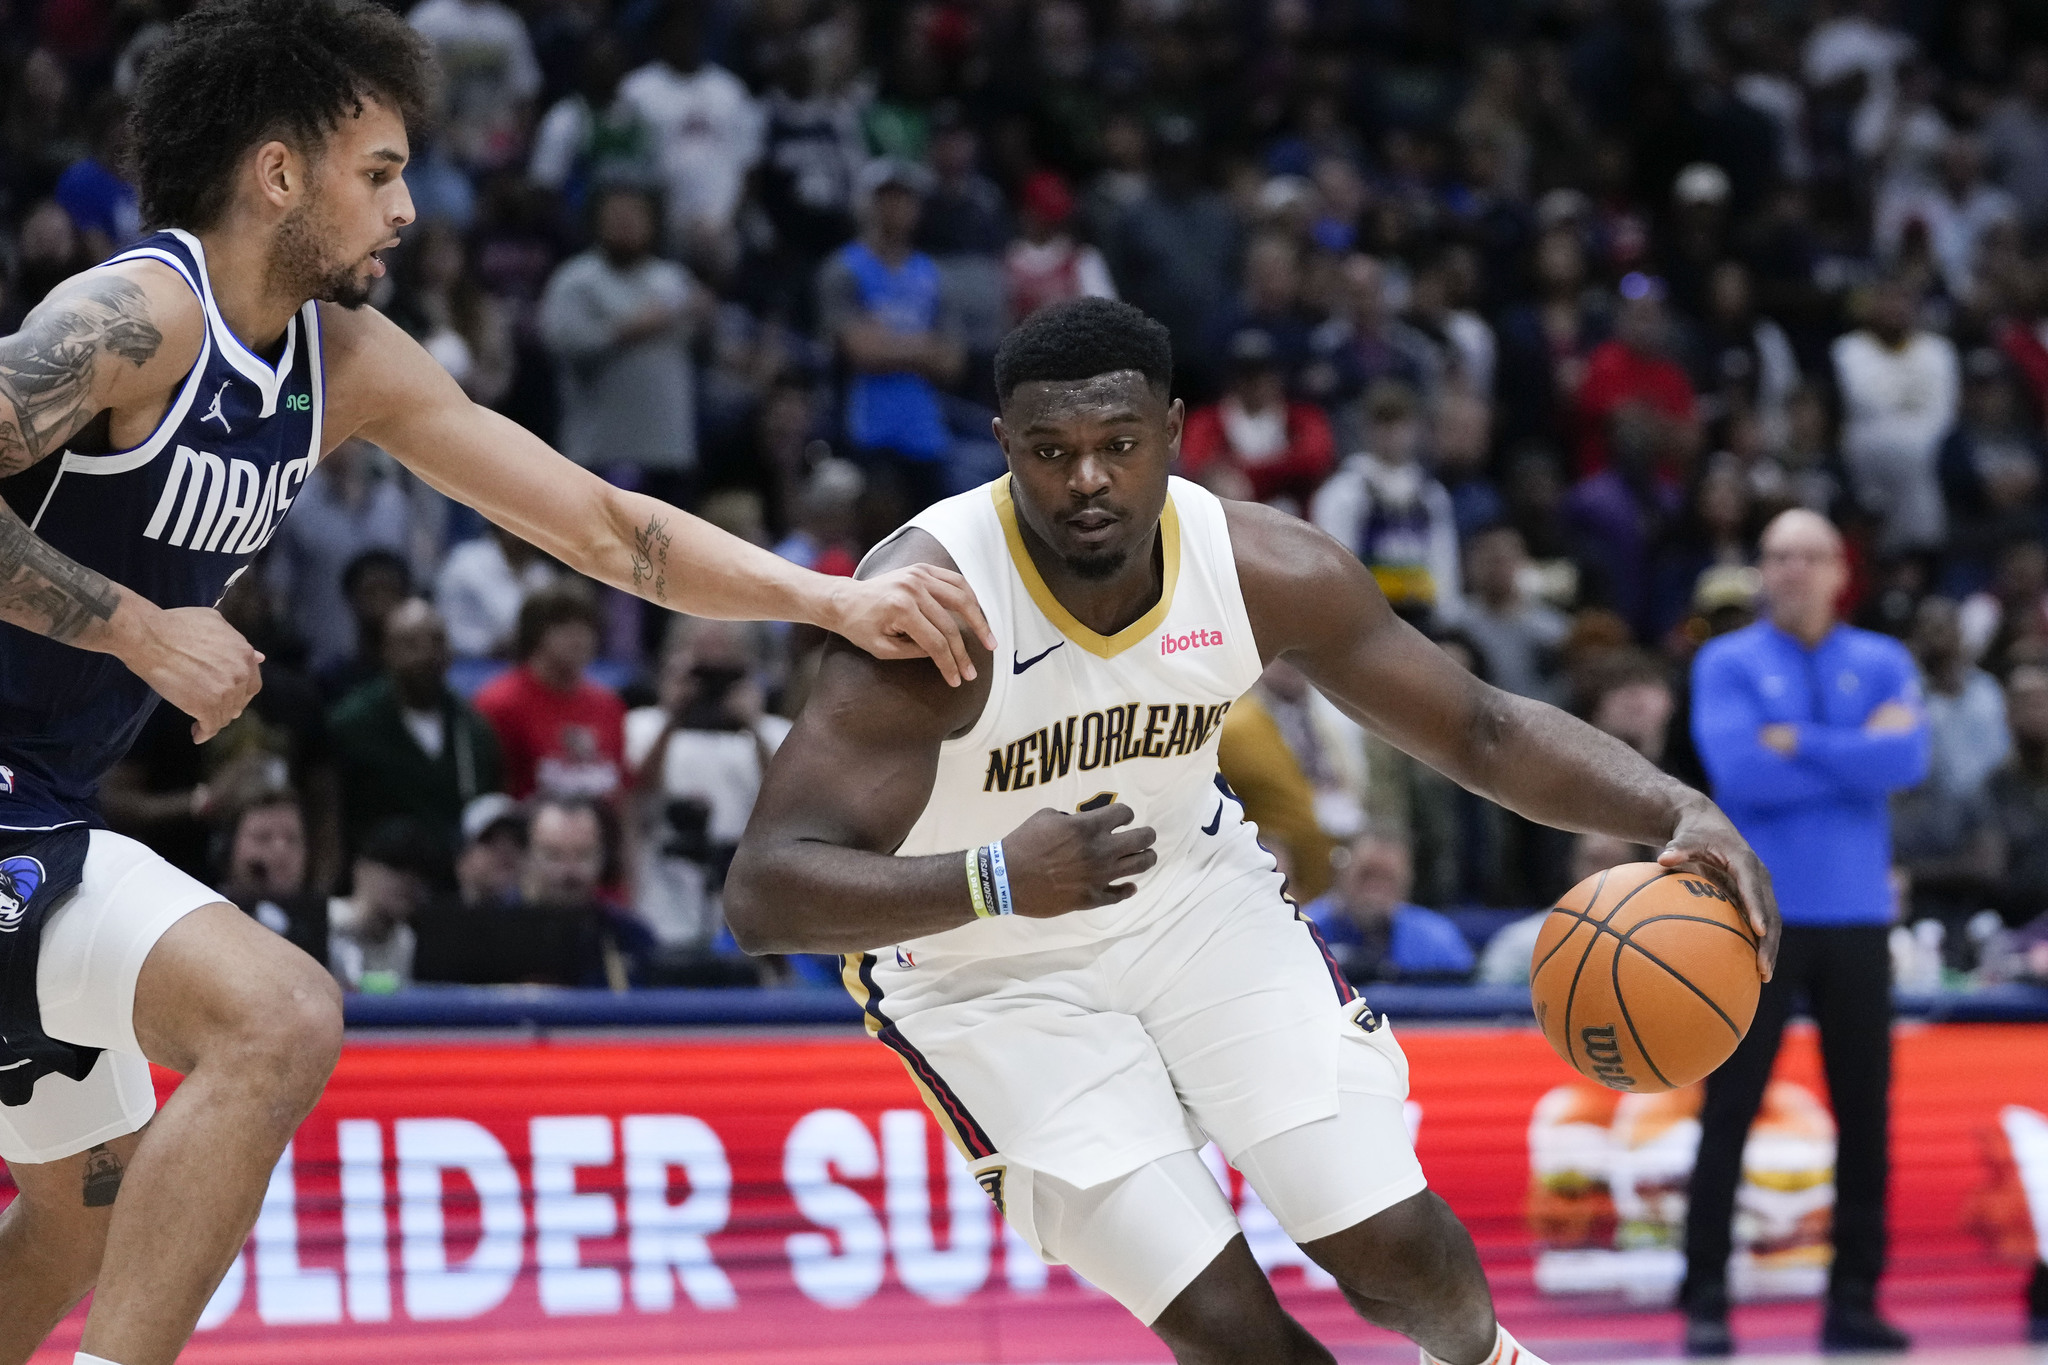 New Orleans Pelicans forward Zion Williamson drives to the basket against the Dallas Mavericks